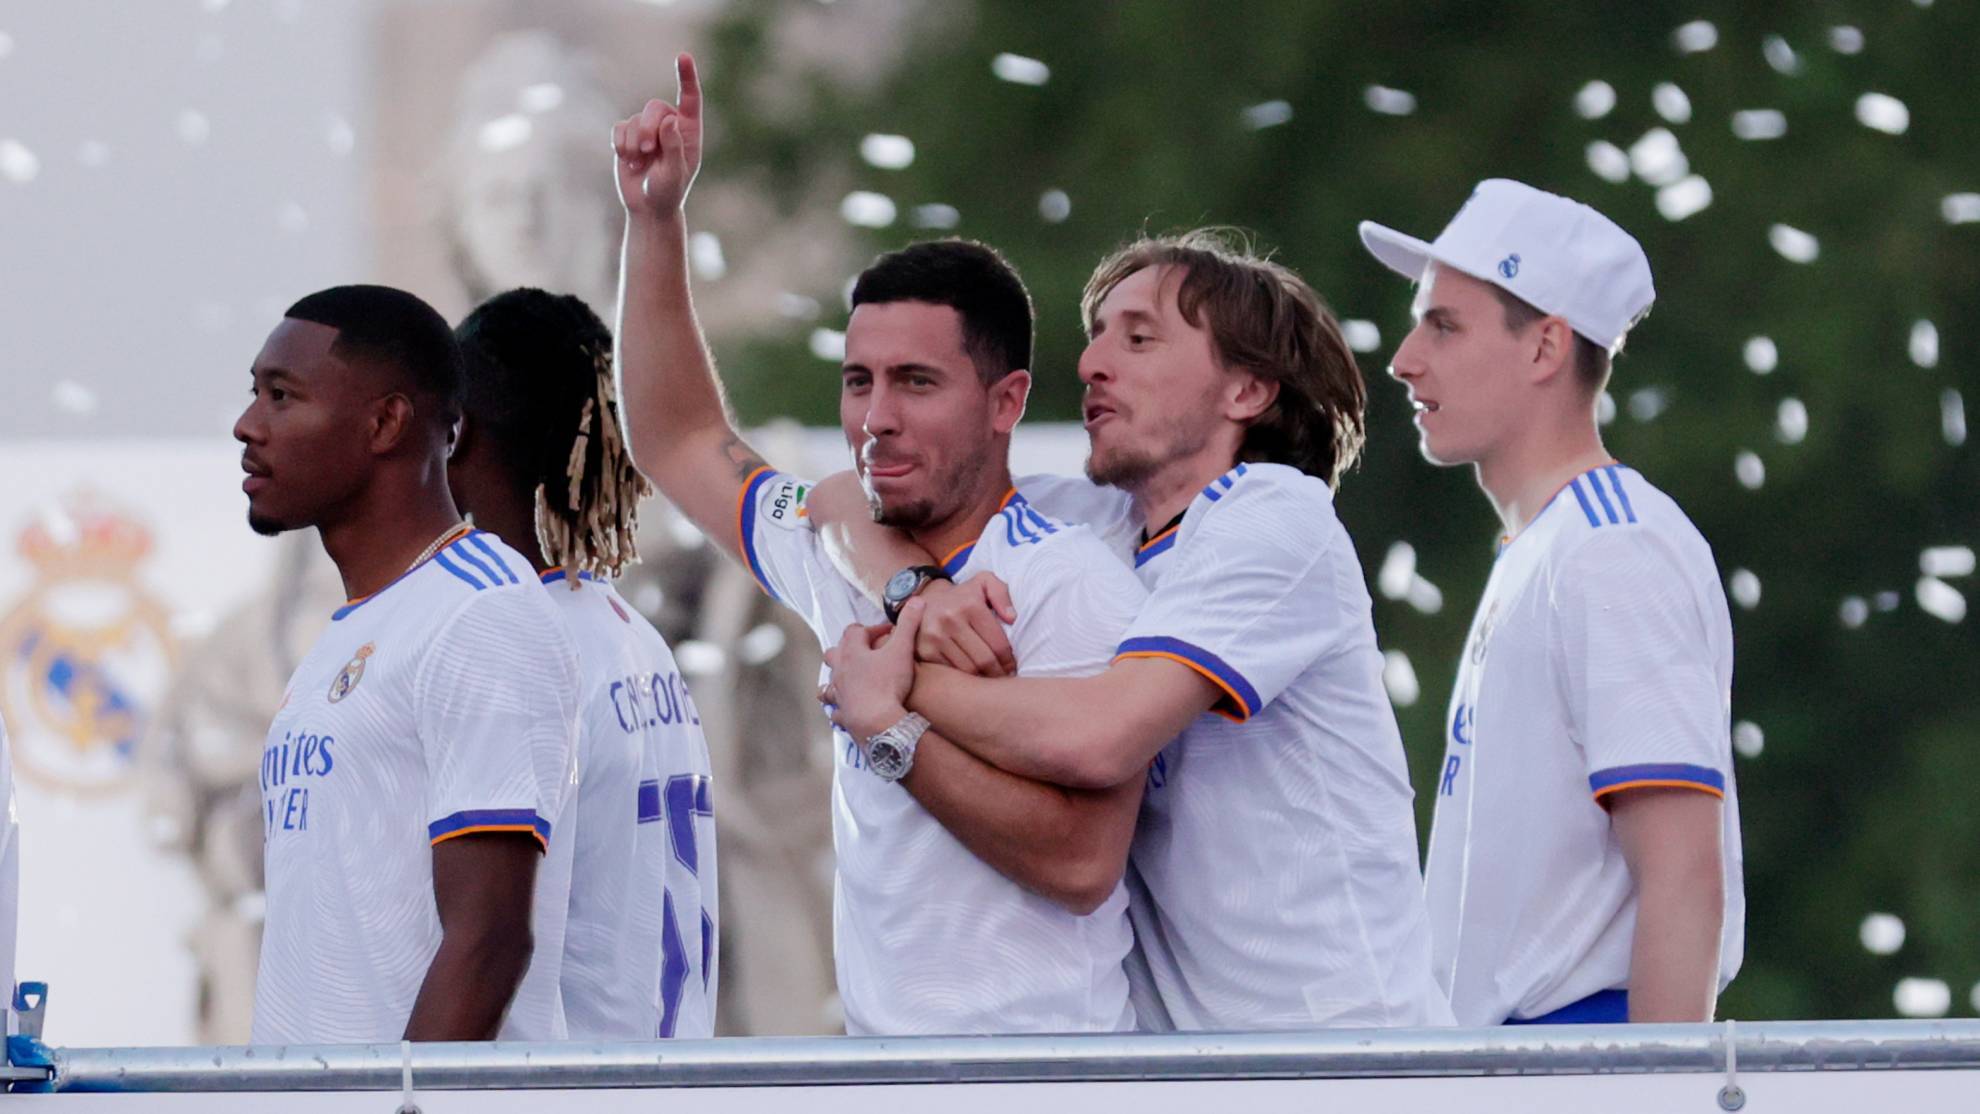 Hazard in high spirits and focused on his future at Real Madrid